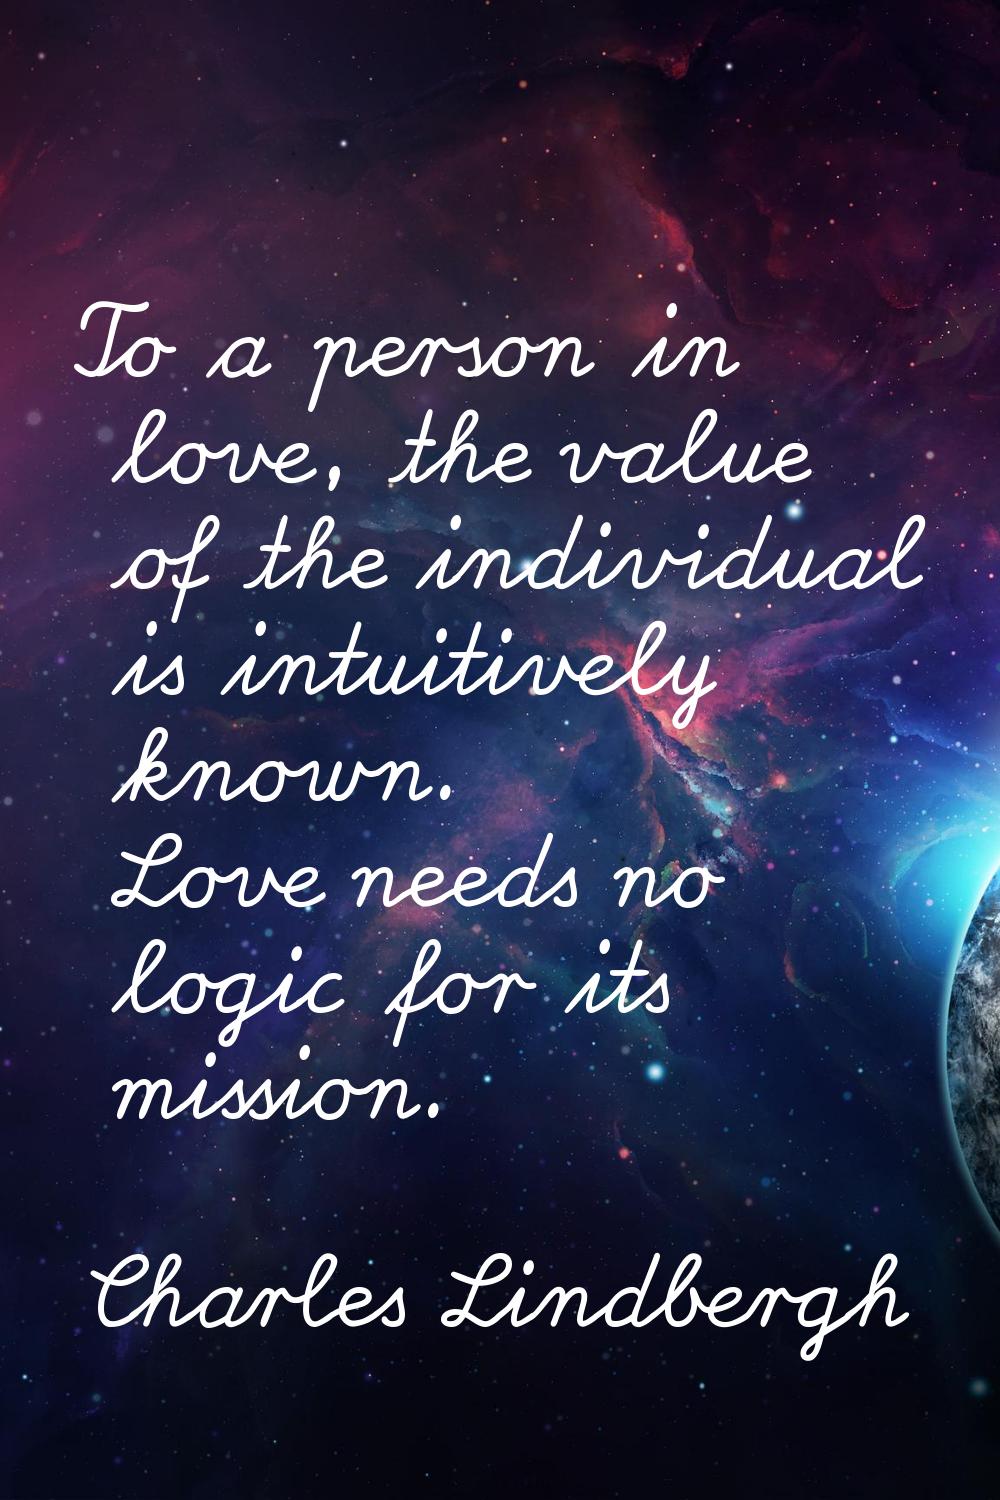 To a person in love, the value of the individual is intuitively known. Love needs no logic for its 